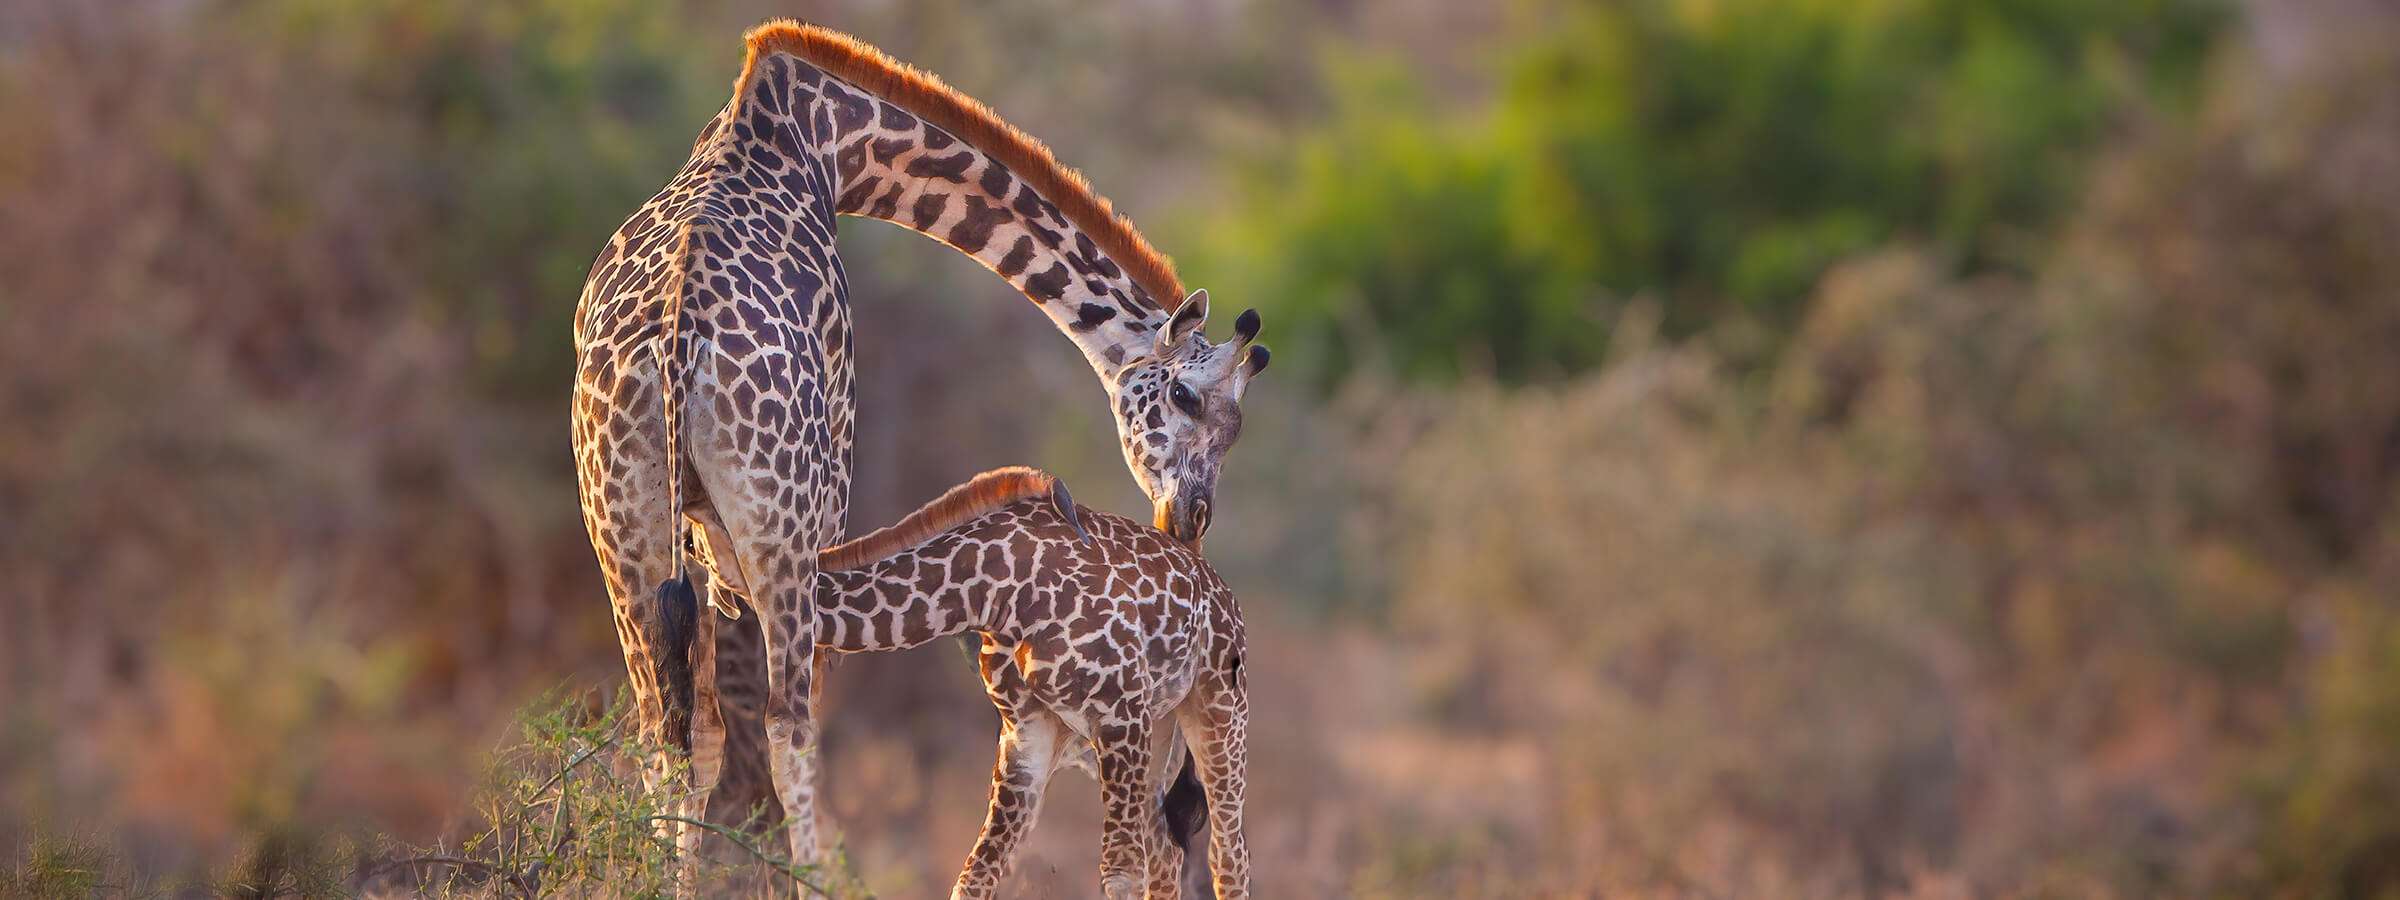 Tanzania - five thing post 1 - five things you never knew about giraffes